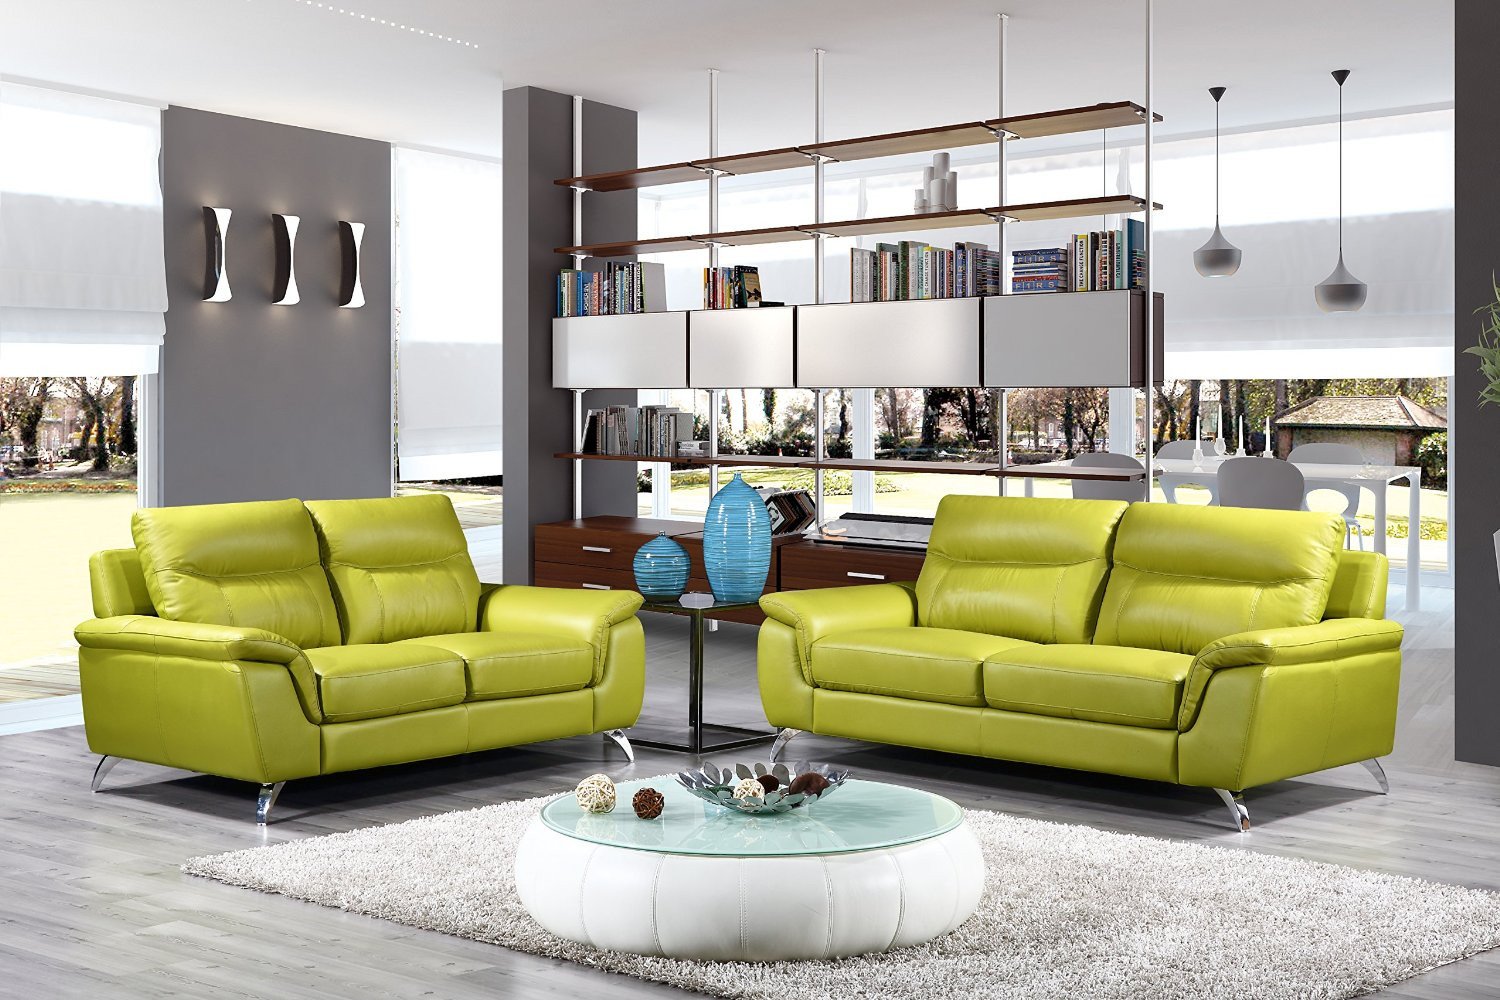 Lime Green Living Room Decor Lime Green Living Room Design with Fresh Colors